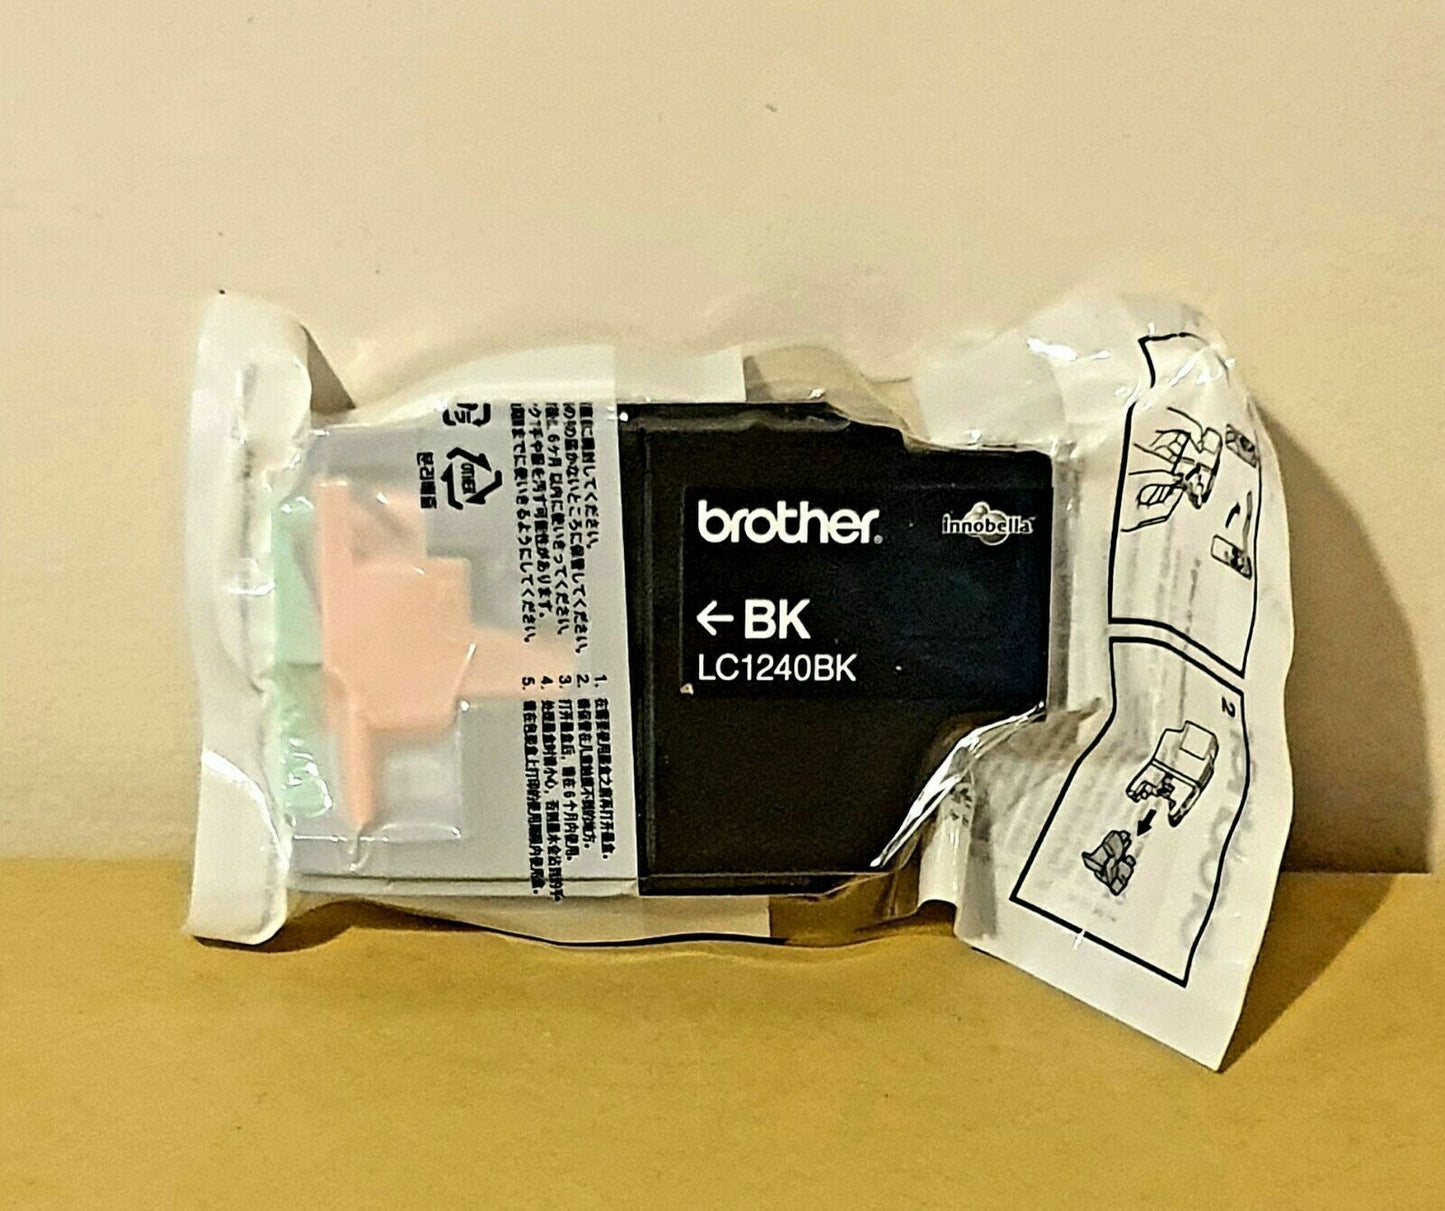 Genuine Brother LC1240 Black Ink Cartridge - FREE UK DELIVERY - VAT included